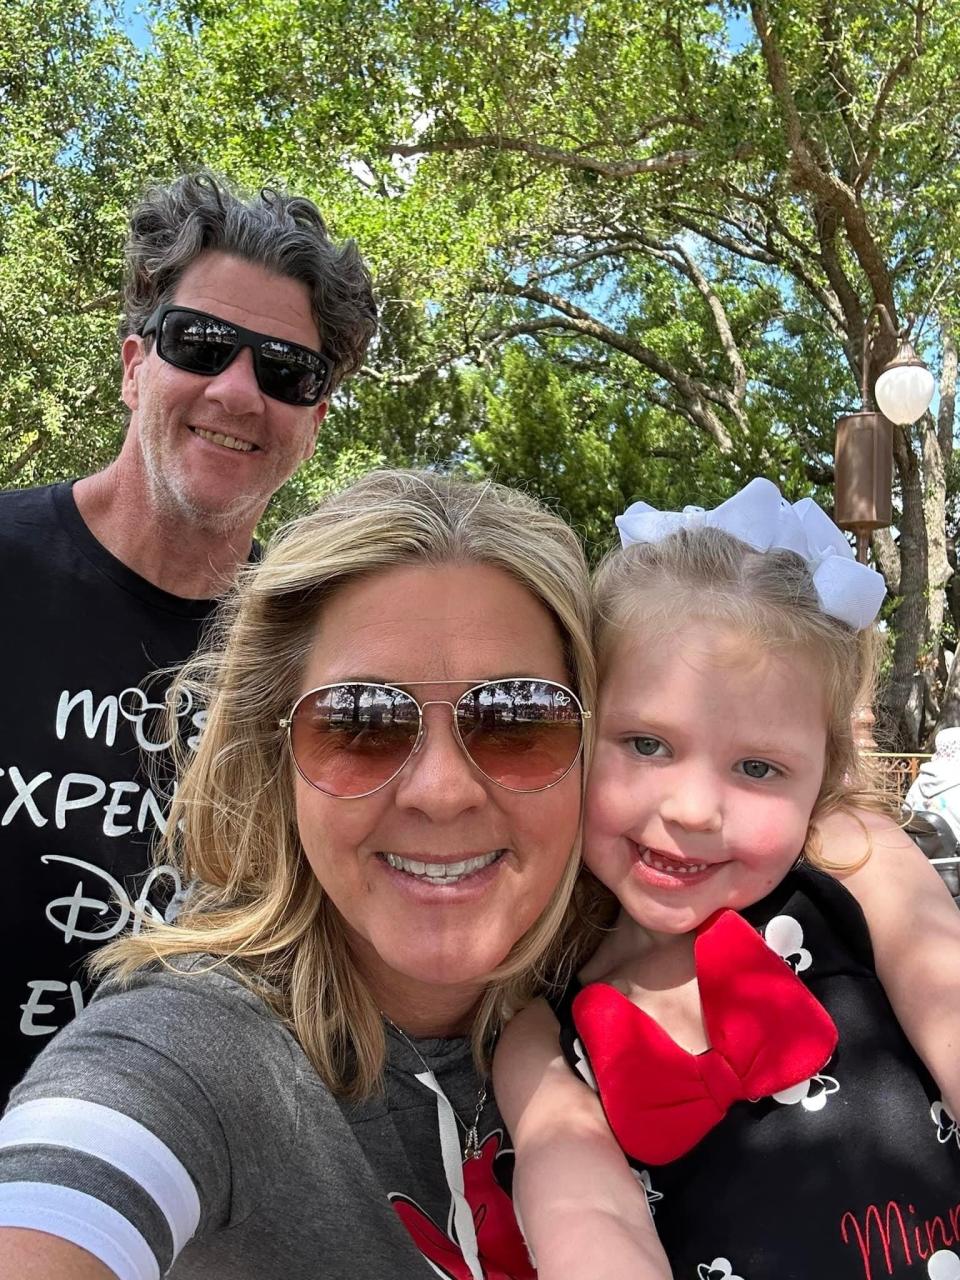 Tracy Gillespie and her husband Jim married later in life and adopted their daughter in 2019. She maintains a relationship with her daughter Sadie's birth mother and acknowledges her with flowers and a video each Mother's Day.